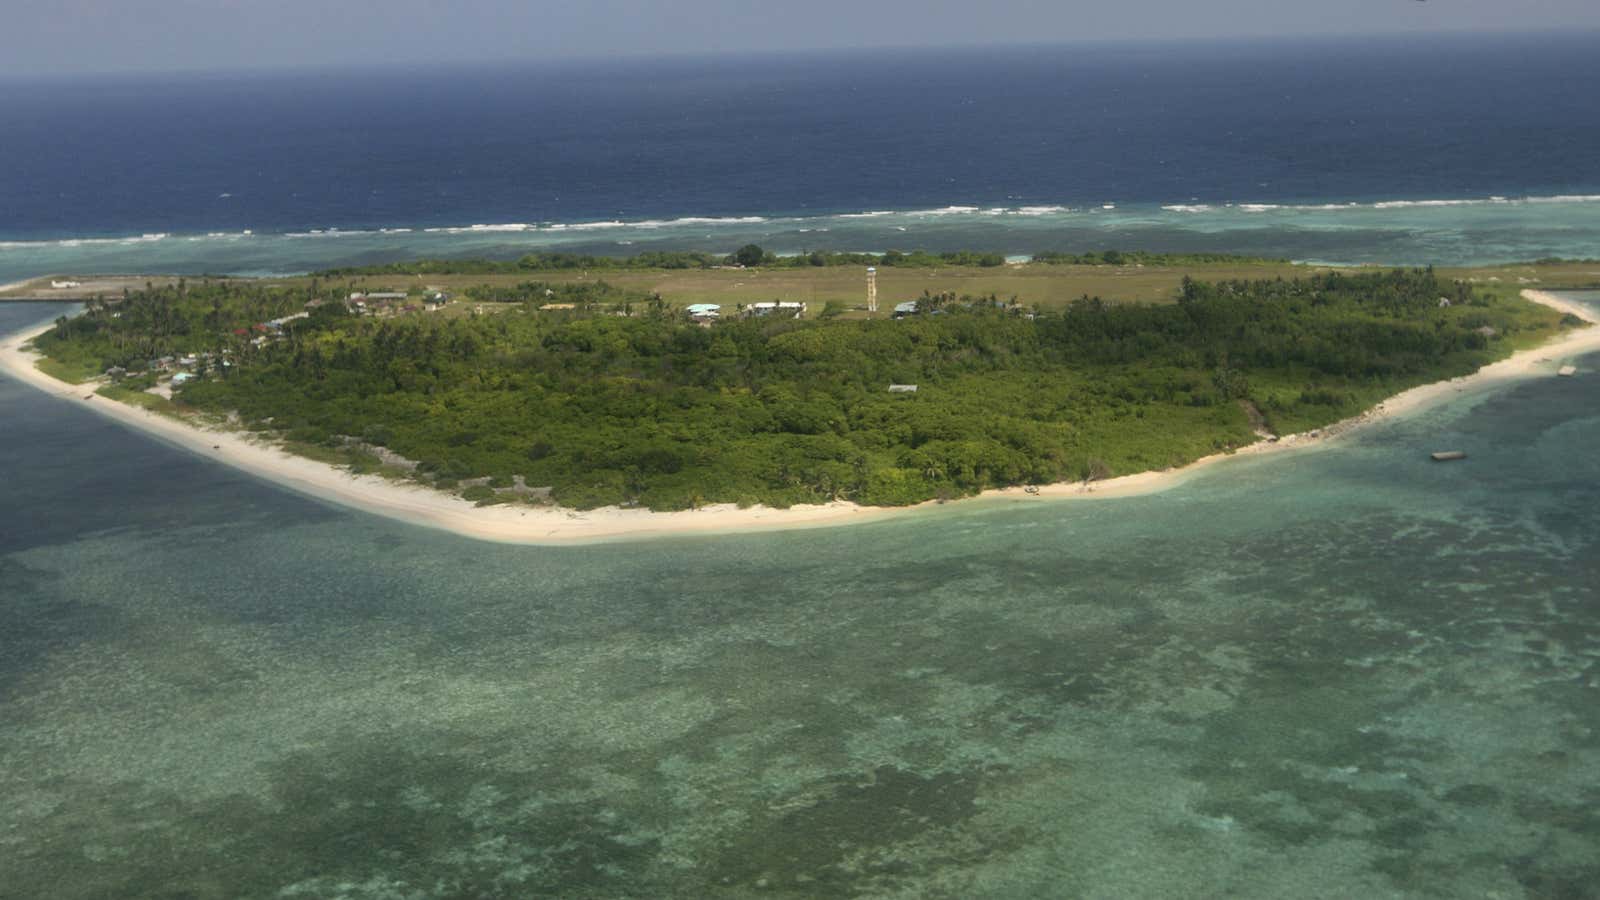 Pag-asa Island, part of the disputed Spratly group of islands.